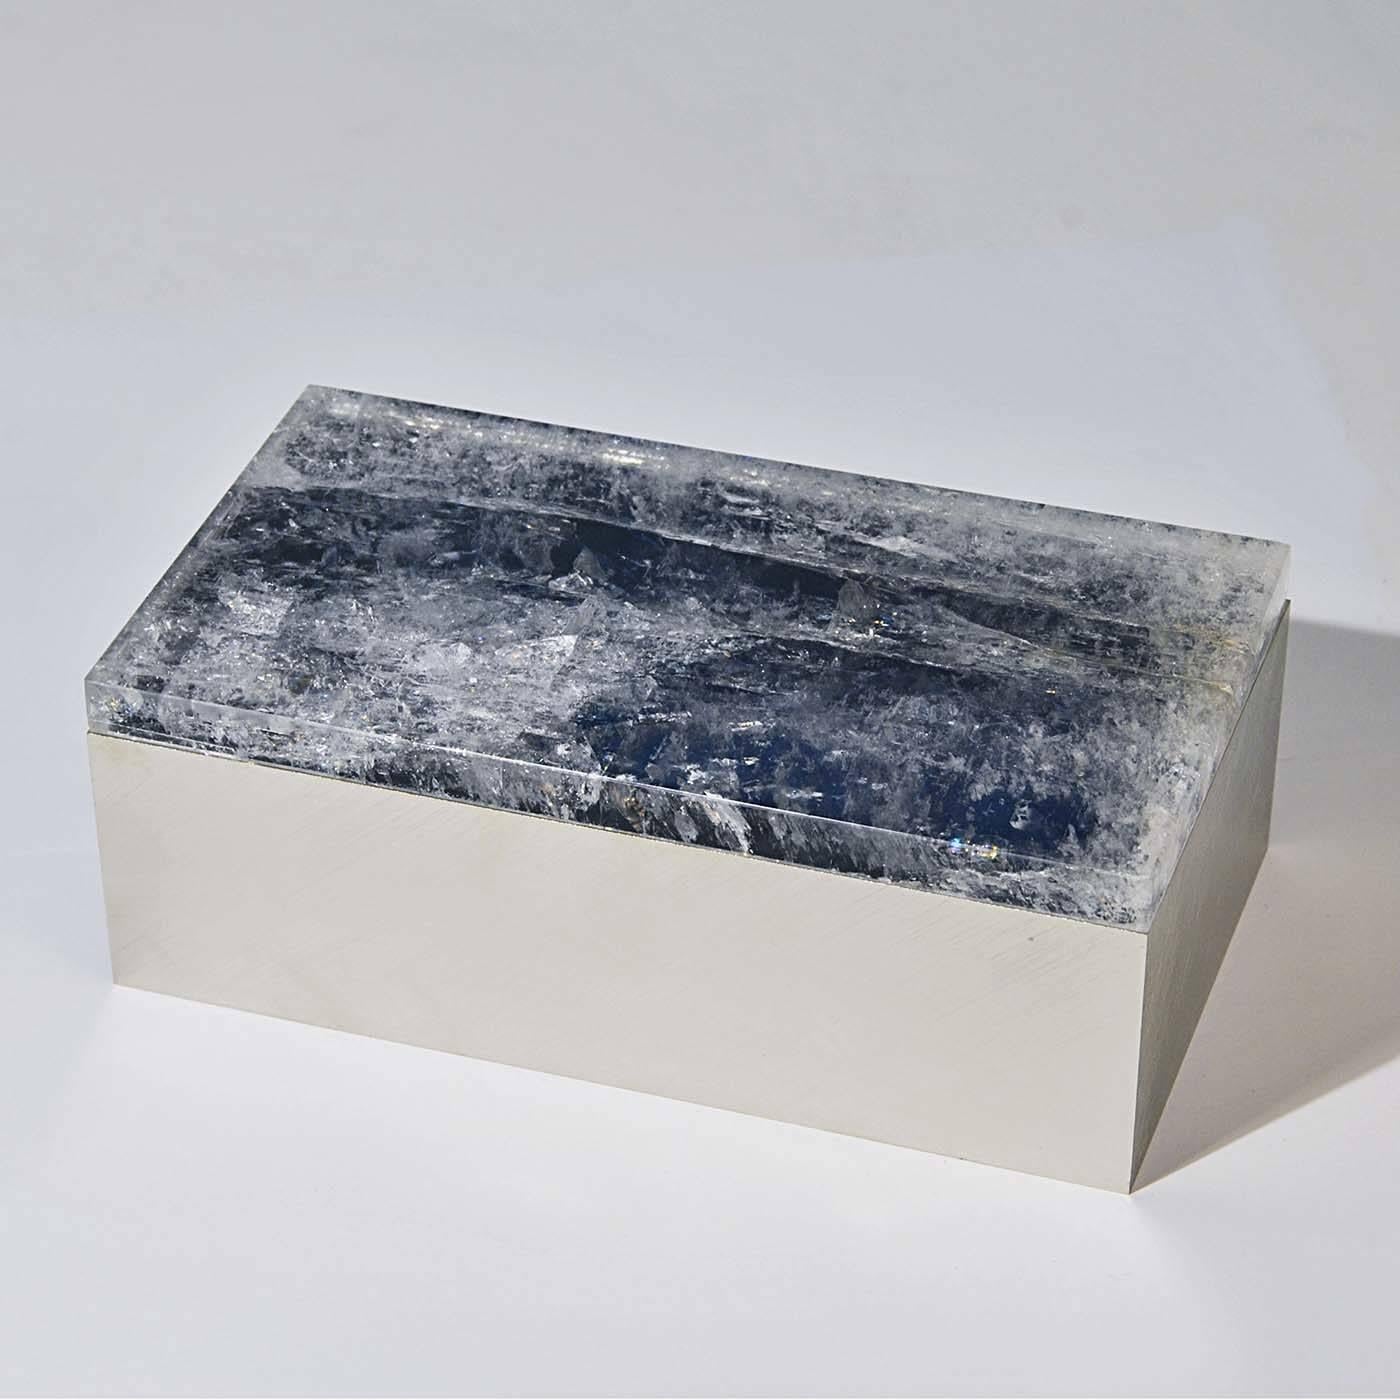 As a gift or part of a personal collection, this exquisite box is a superb addition to any jewelry display. A stately lid in deep blue quartz rests atop a rectangular box fashioned of brushed nickel-plated brass. The smooth texture of the brass and